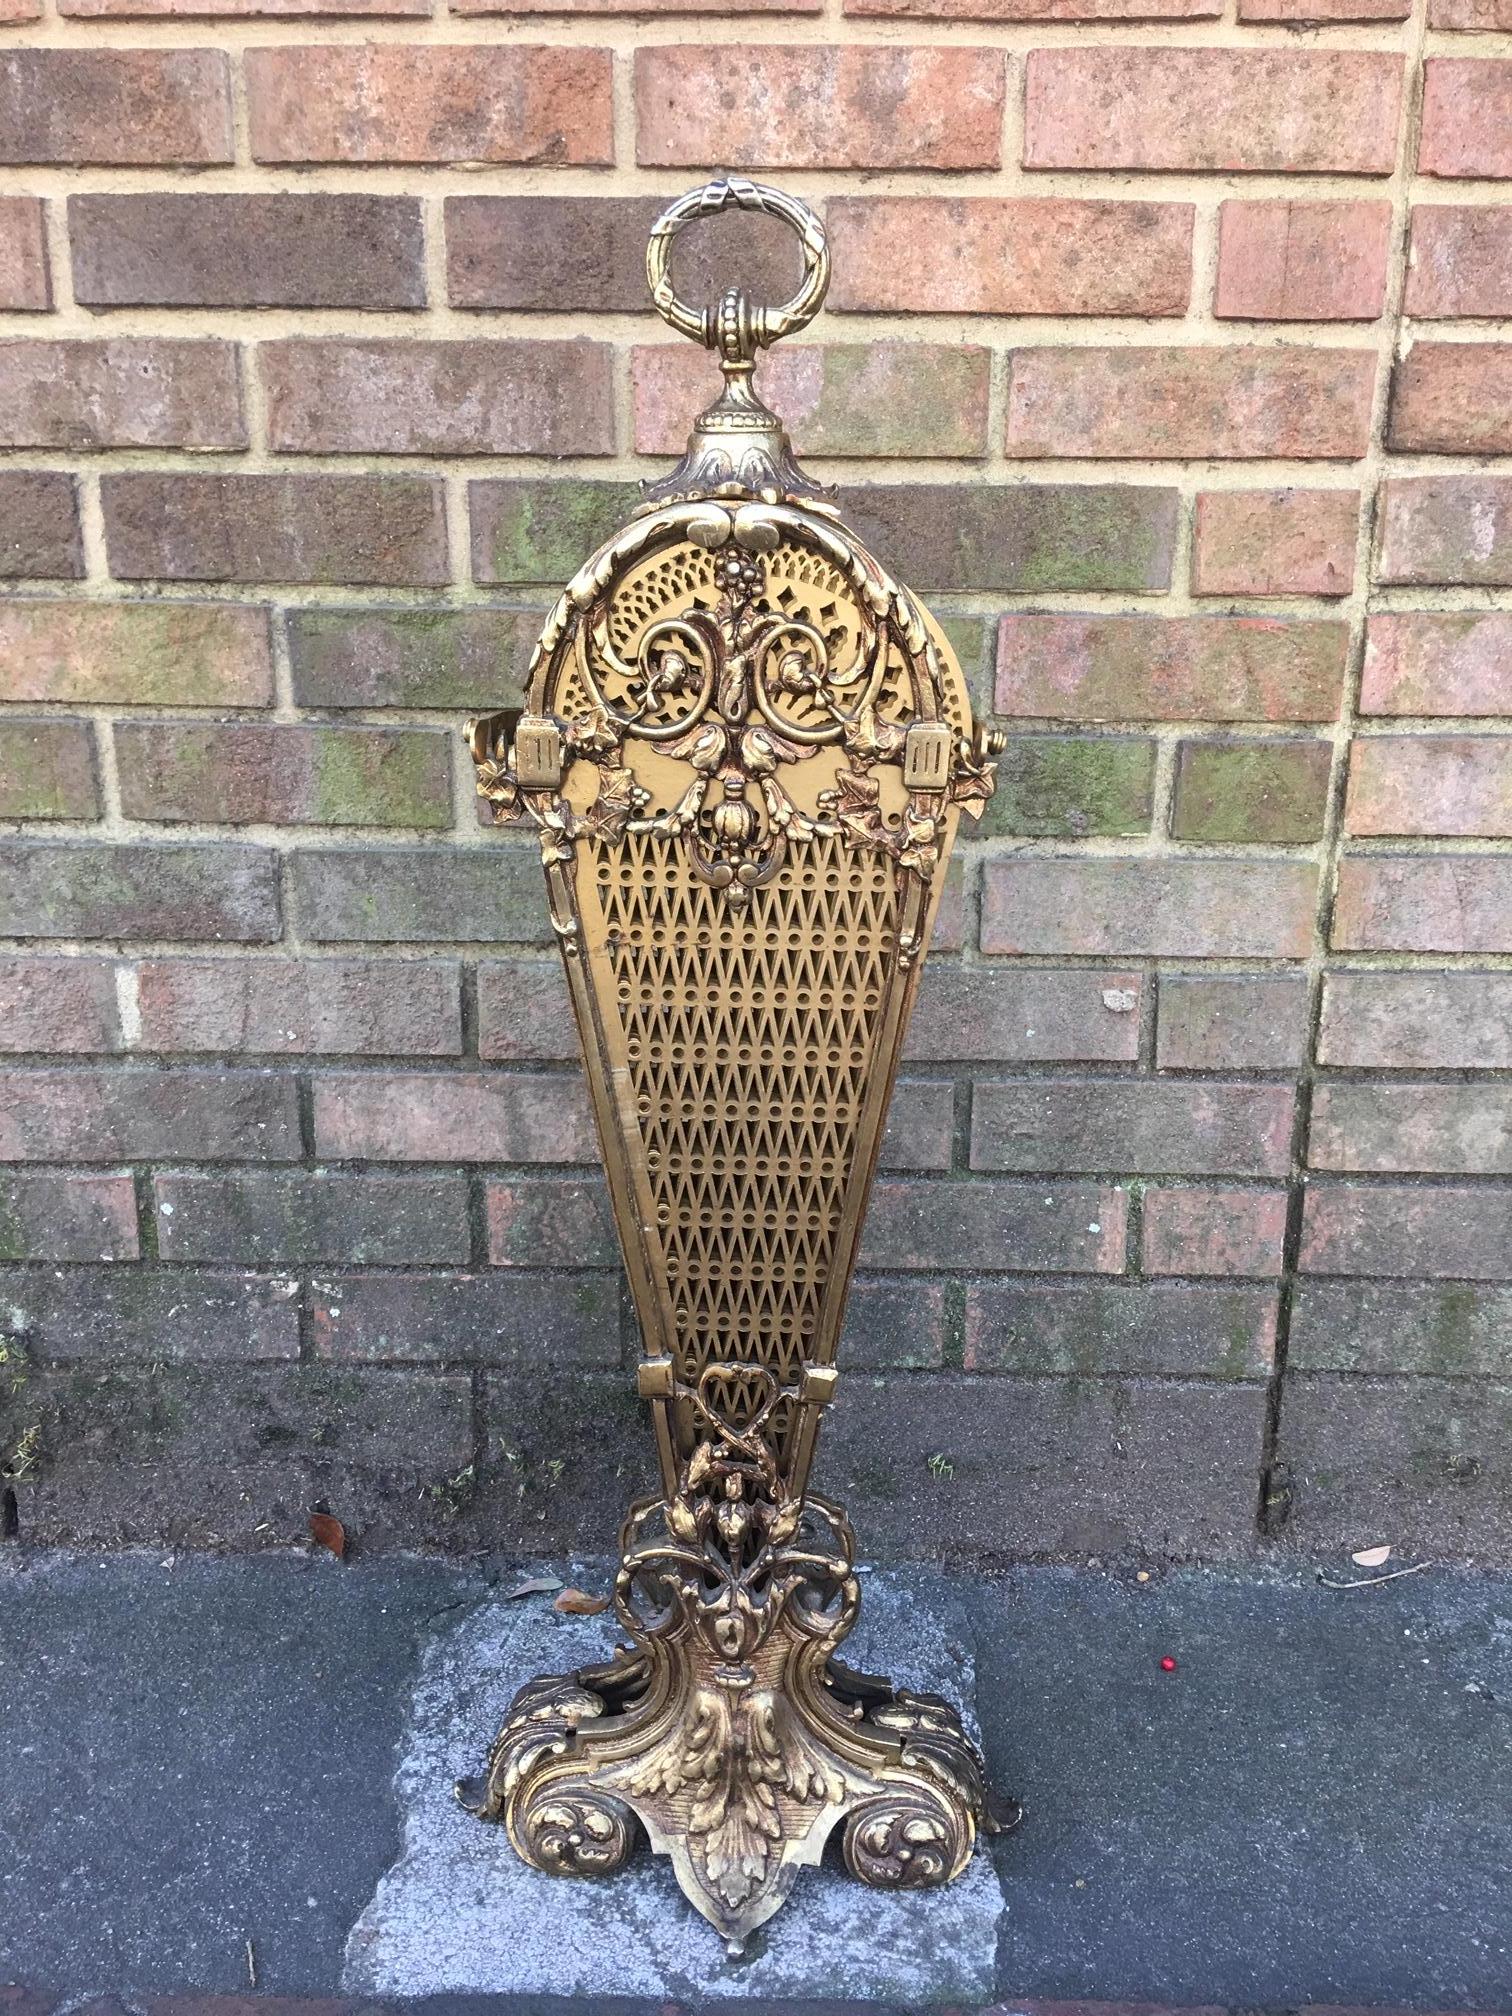 French brass decorative pierced folding fire place fan screen with a foliage and round handle, intertwined scrolled floral swags with a floral medallion, centered supporting bead work, and resting on a step back foliage medallion, and fluted finial